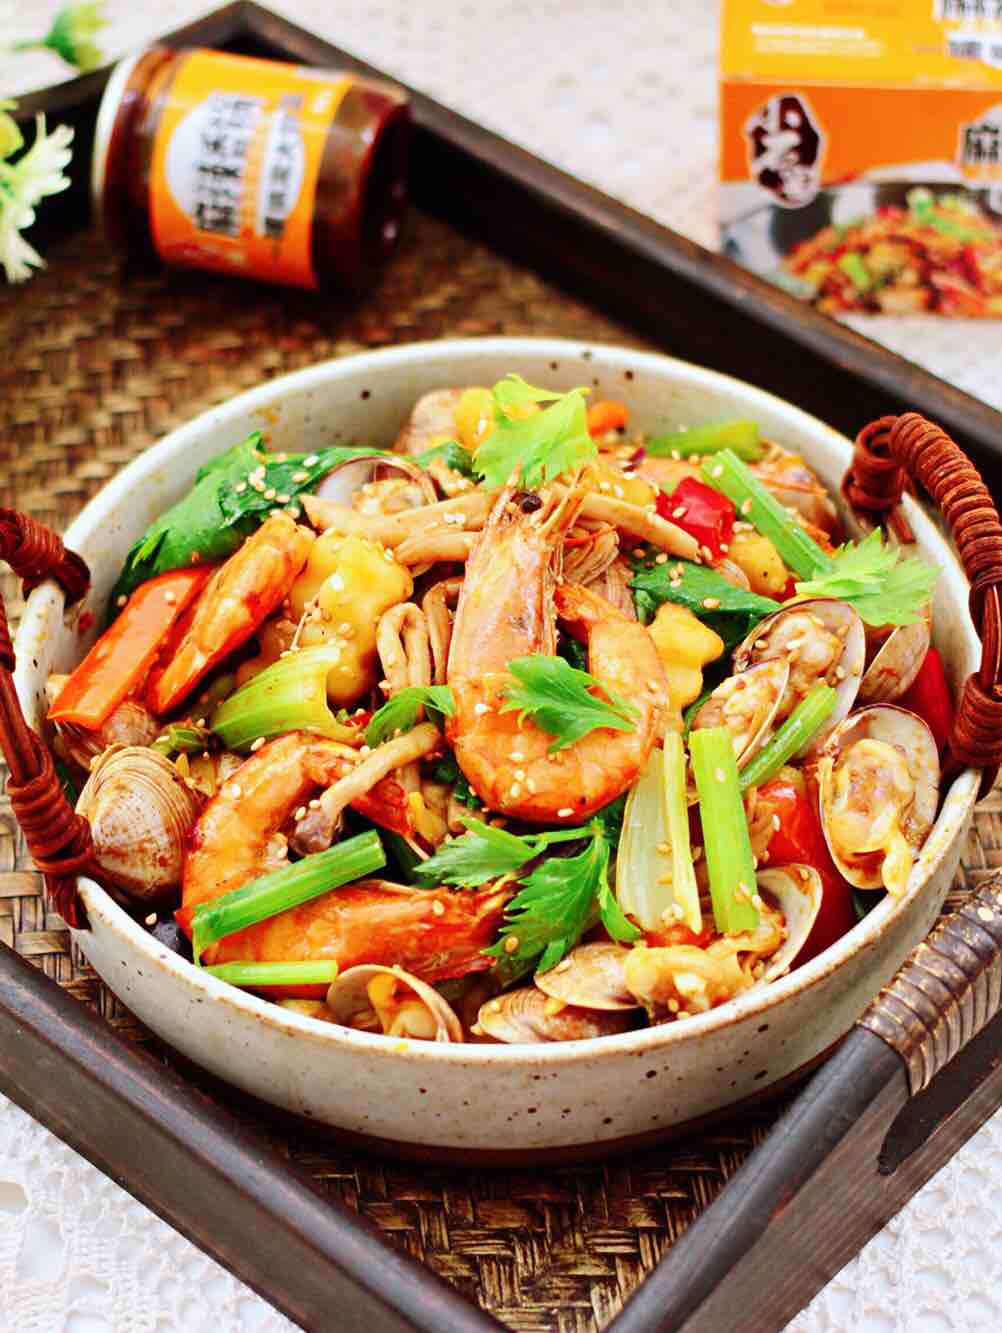 Spicy Hot Pot with Seafood and Mixed Vegetables recipe